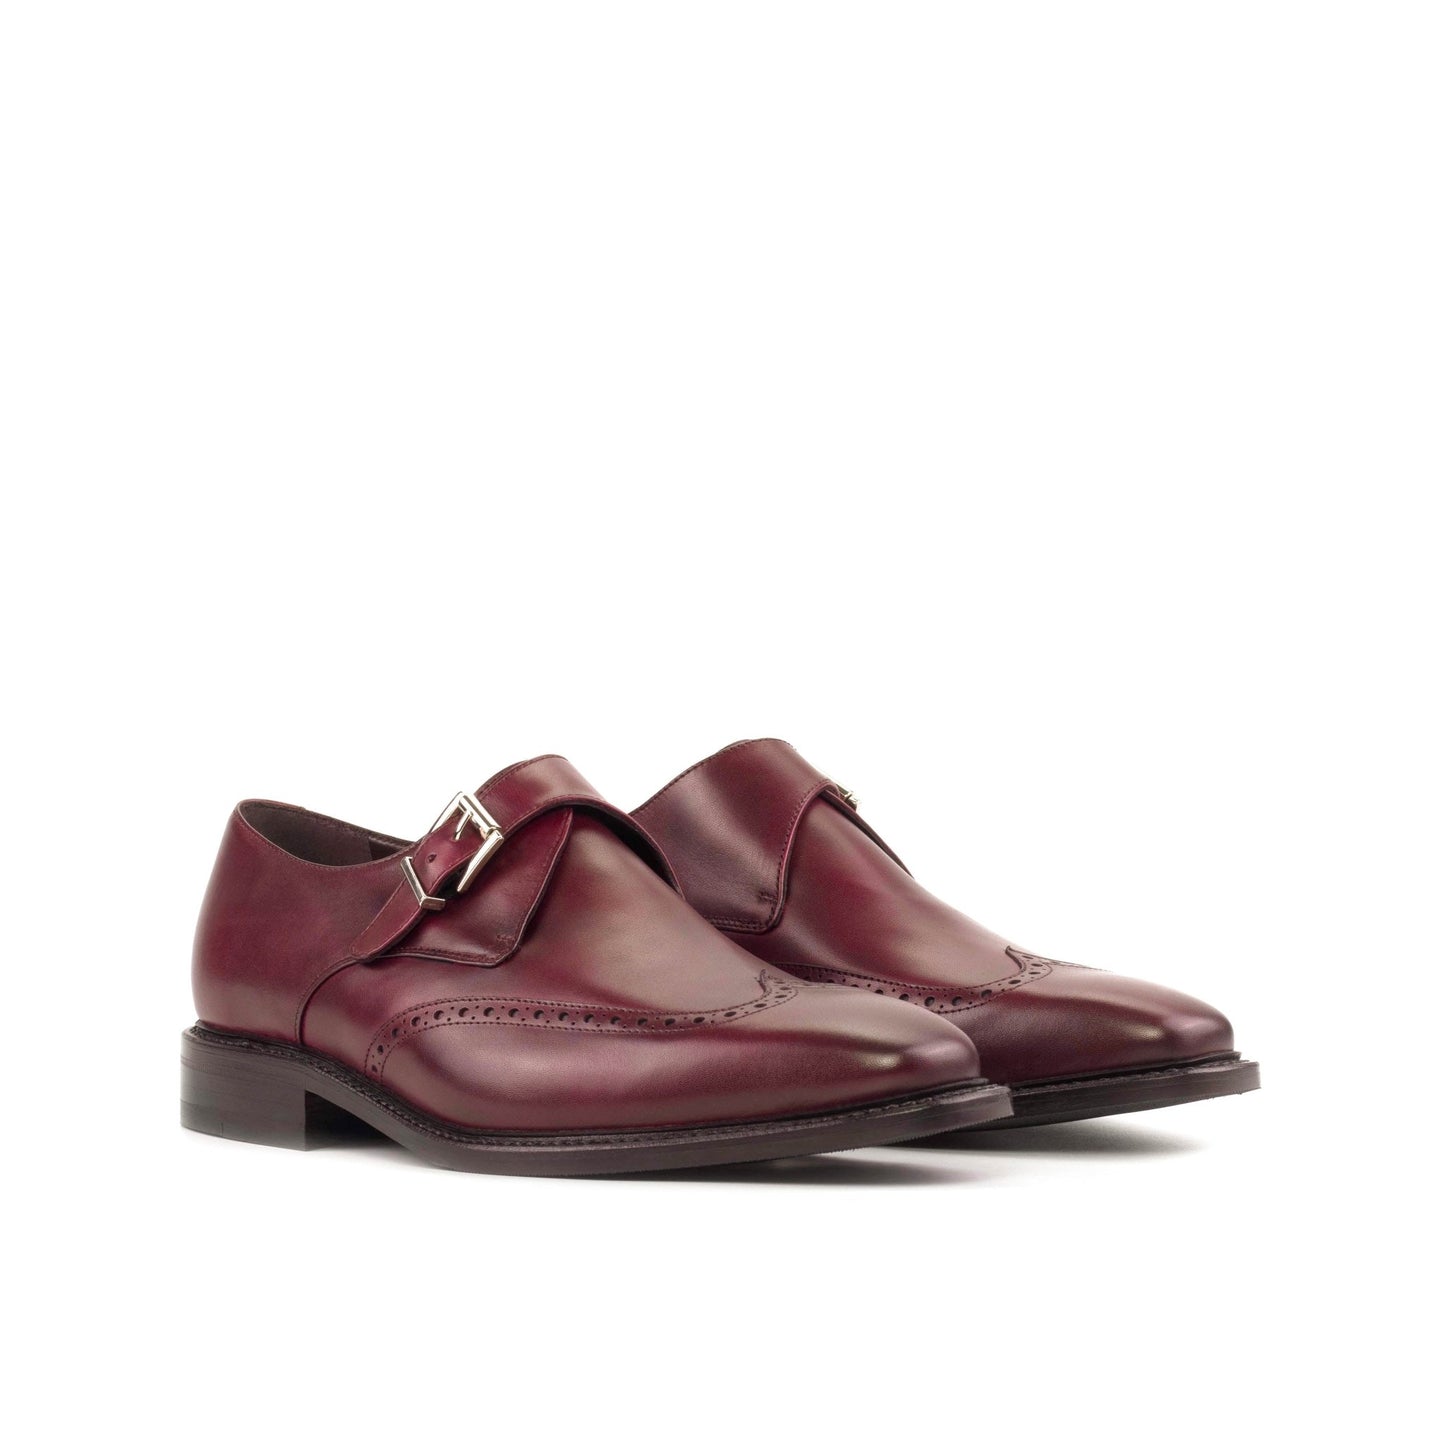 Single Monk in Burgundy Box Calf - Zatorres | Free Shipping on orders over $200